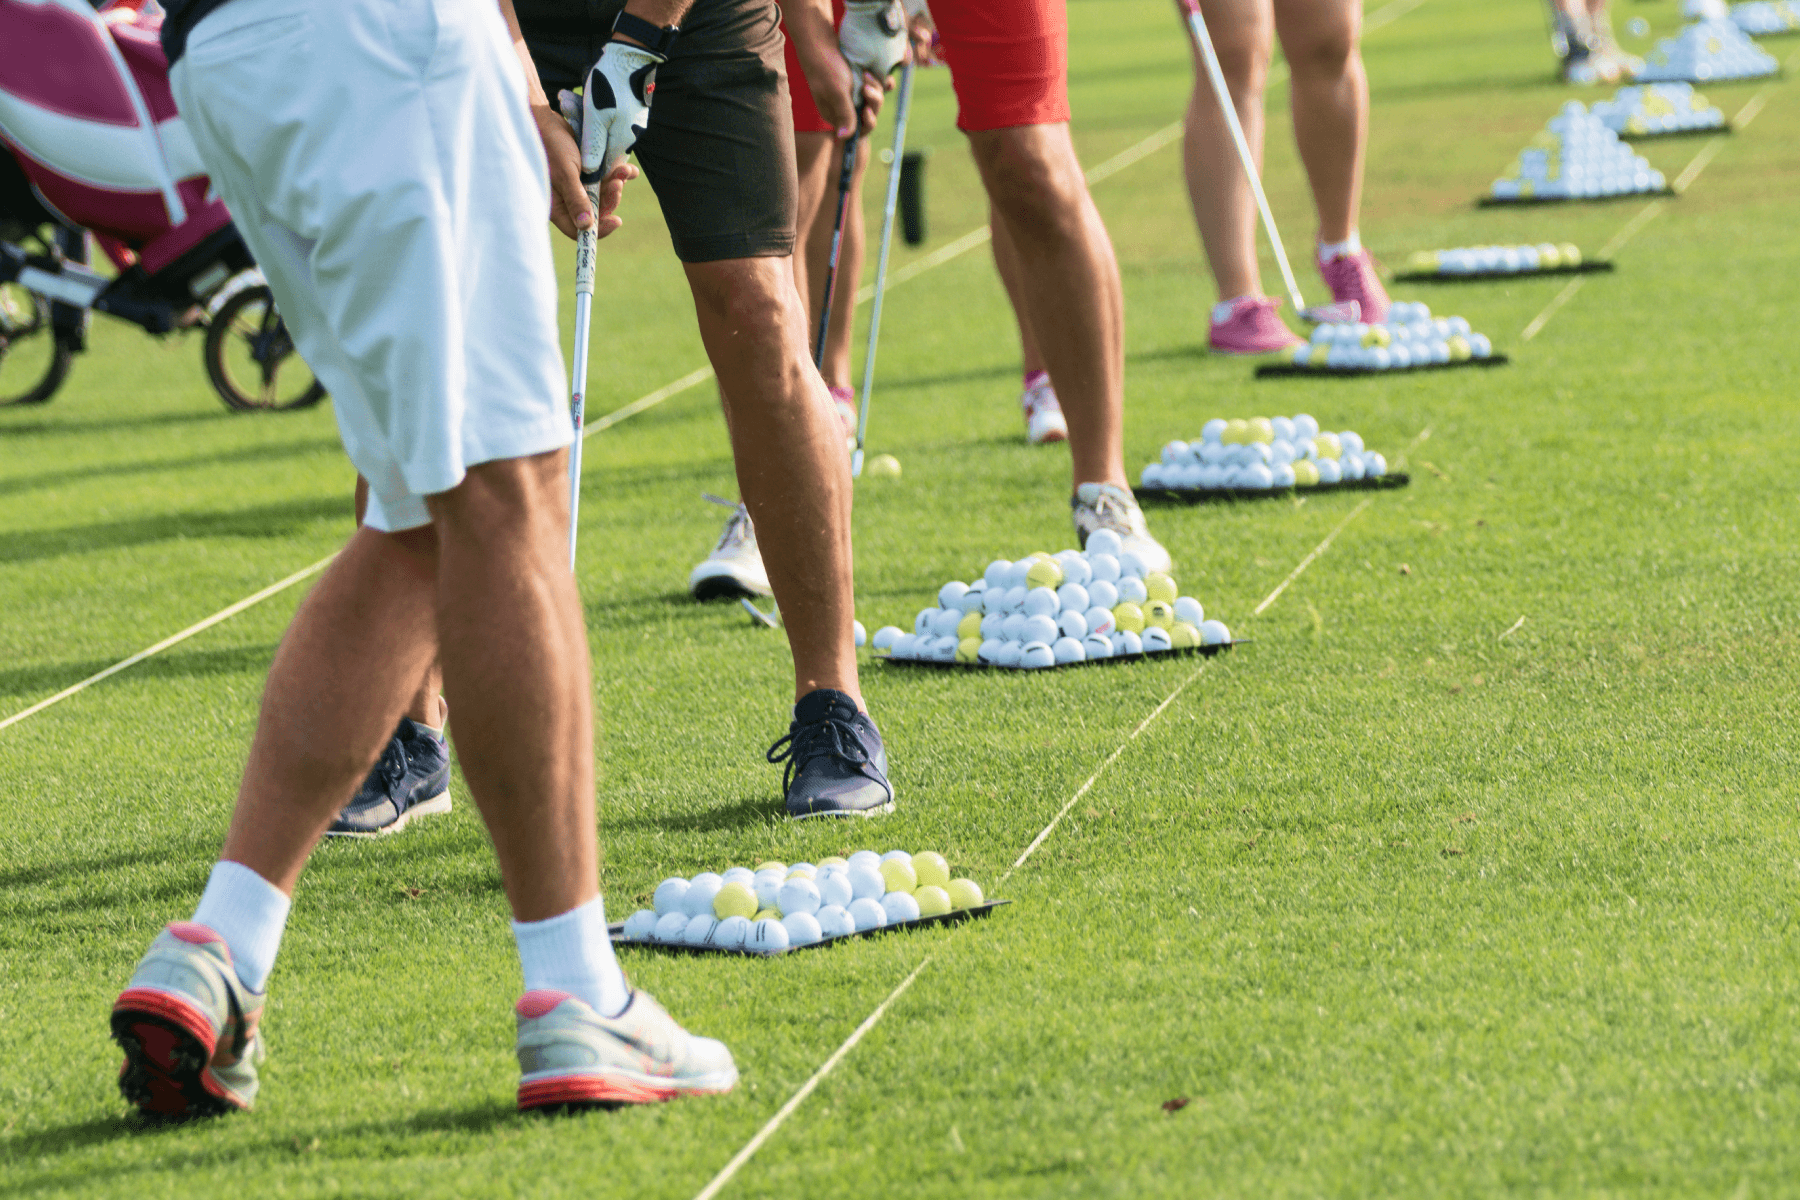 The legs of golfers lined up preparing to swing at nouns of golf balls.